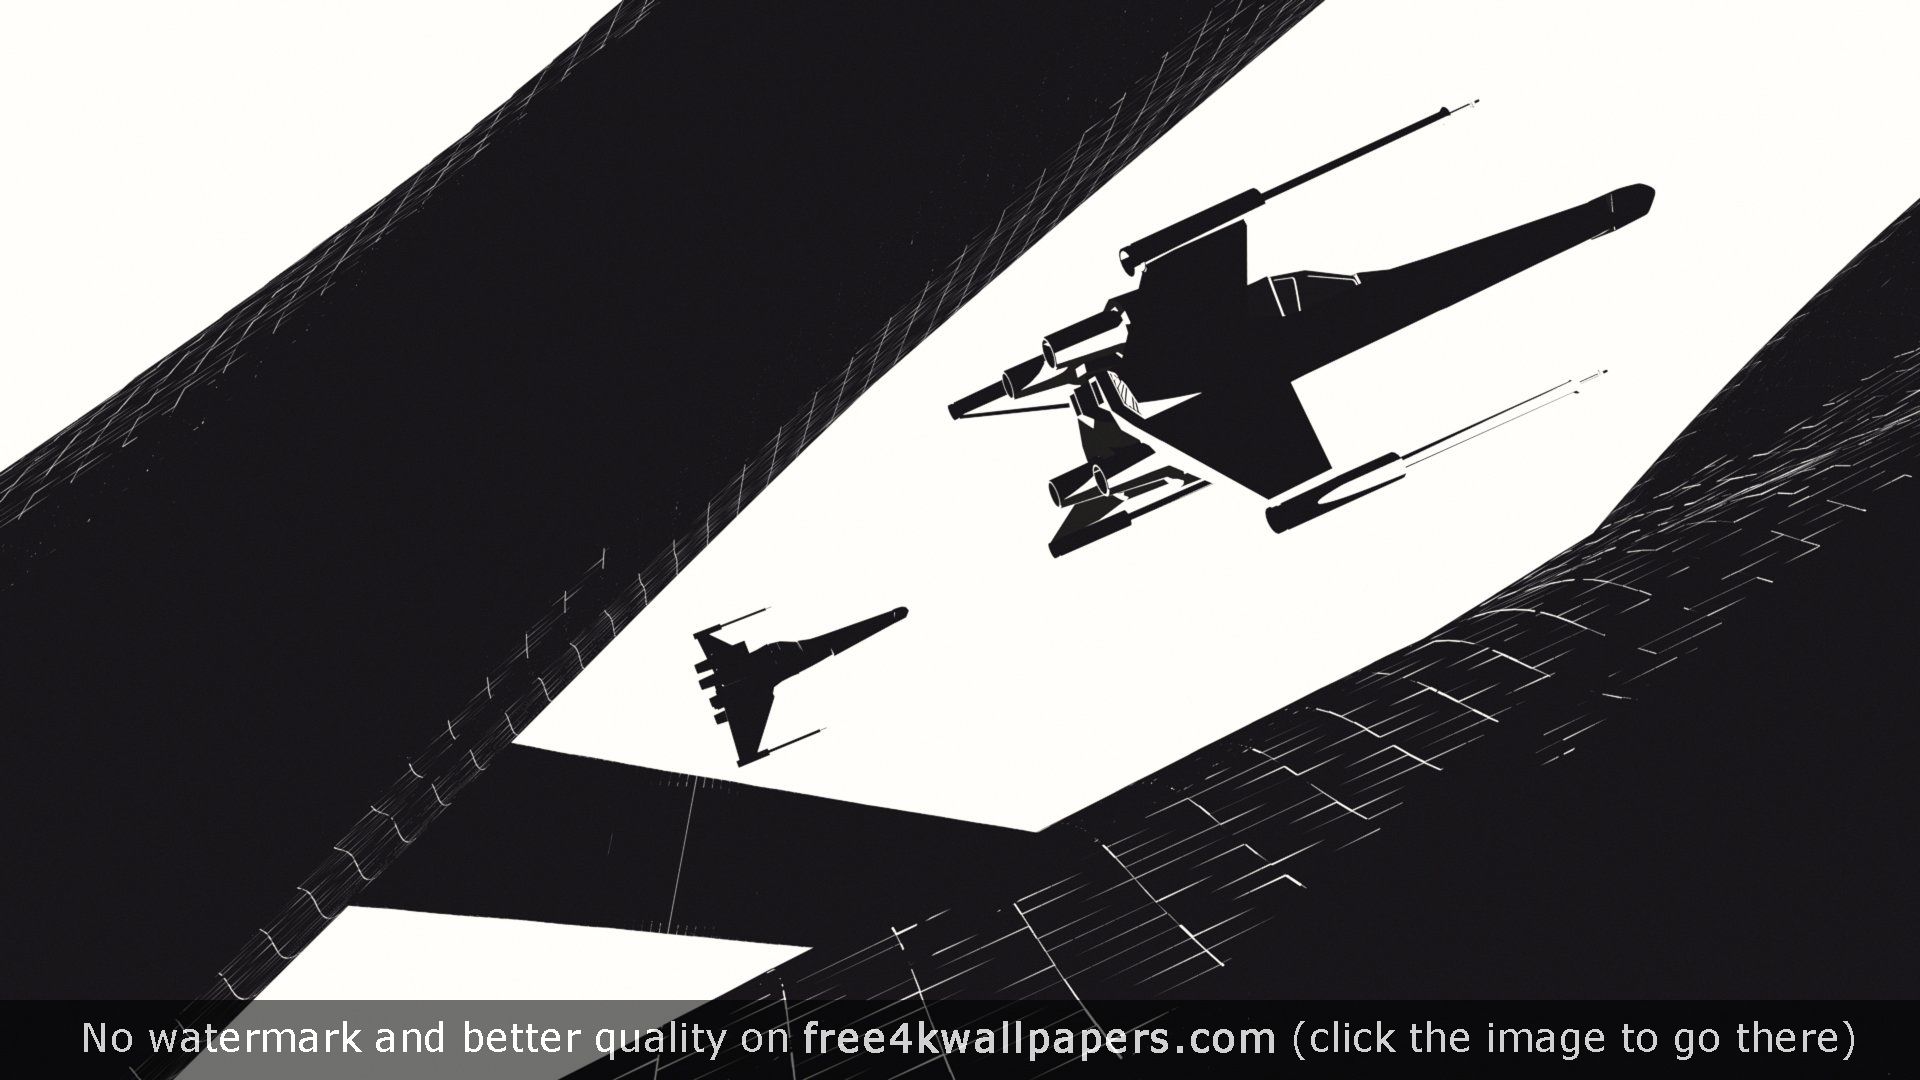 xwing wallpapers for desktop and mobile devices